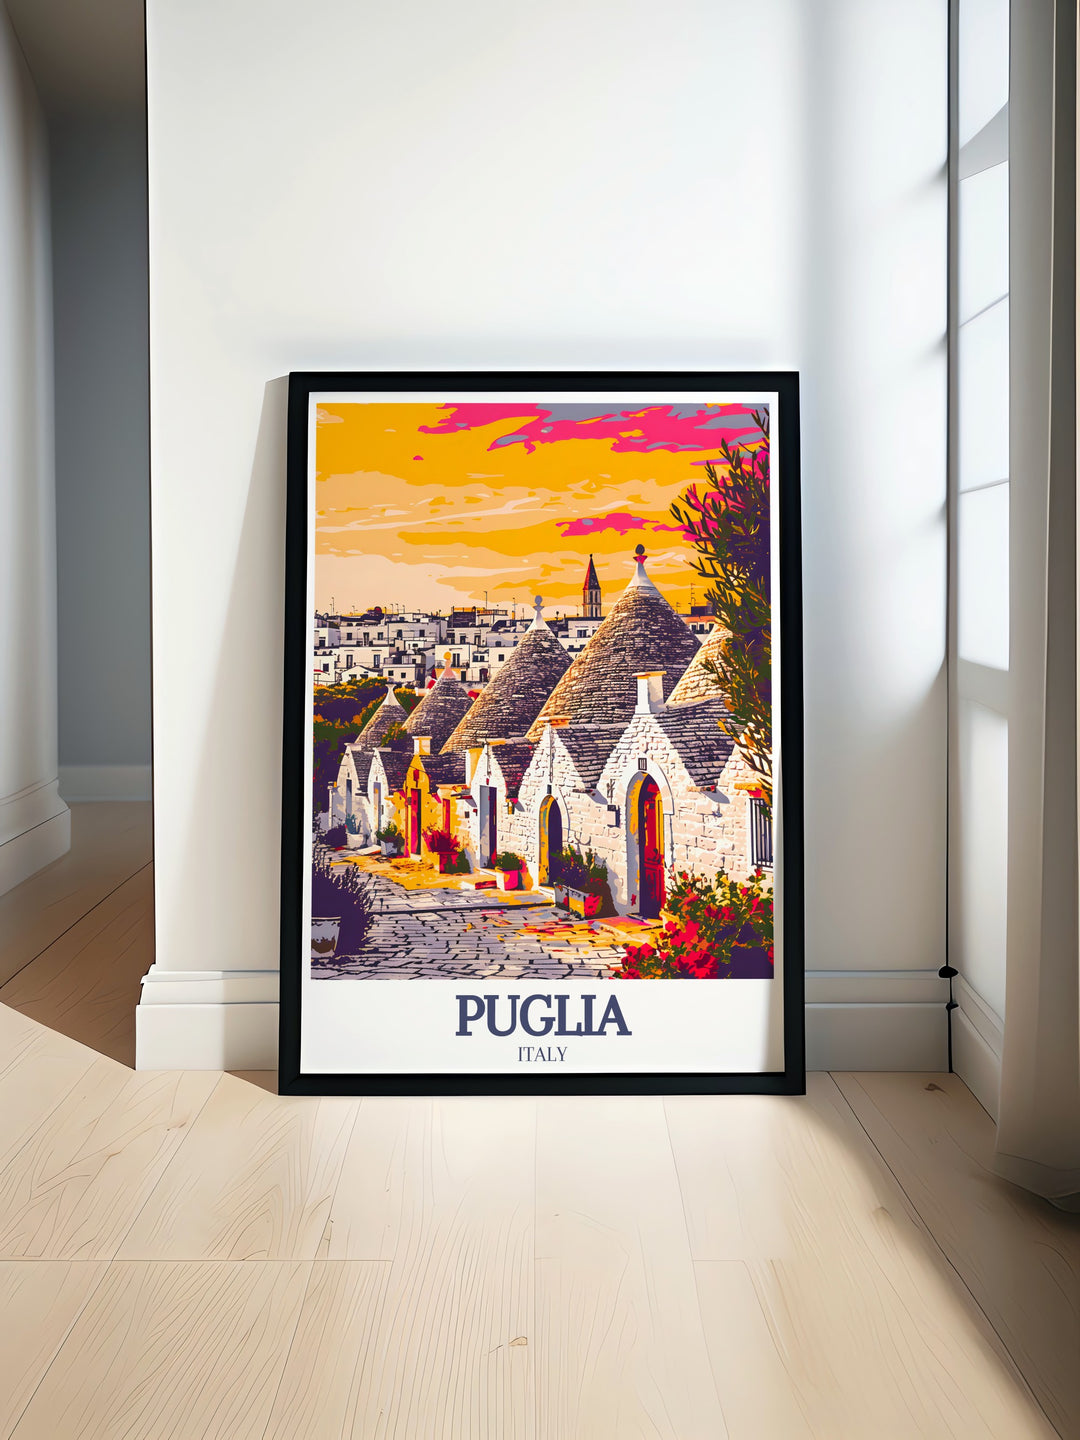 Experience the unique charm of Trulli houses in Alberobello with our Italy Travel Print. This Italy Wall Art captures the distinctive architecture of Trulli houses in vibrant detail, making it a perfect addition to your home decor.